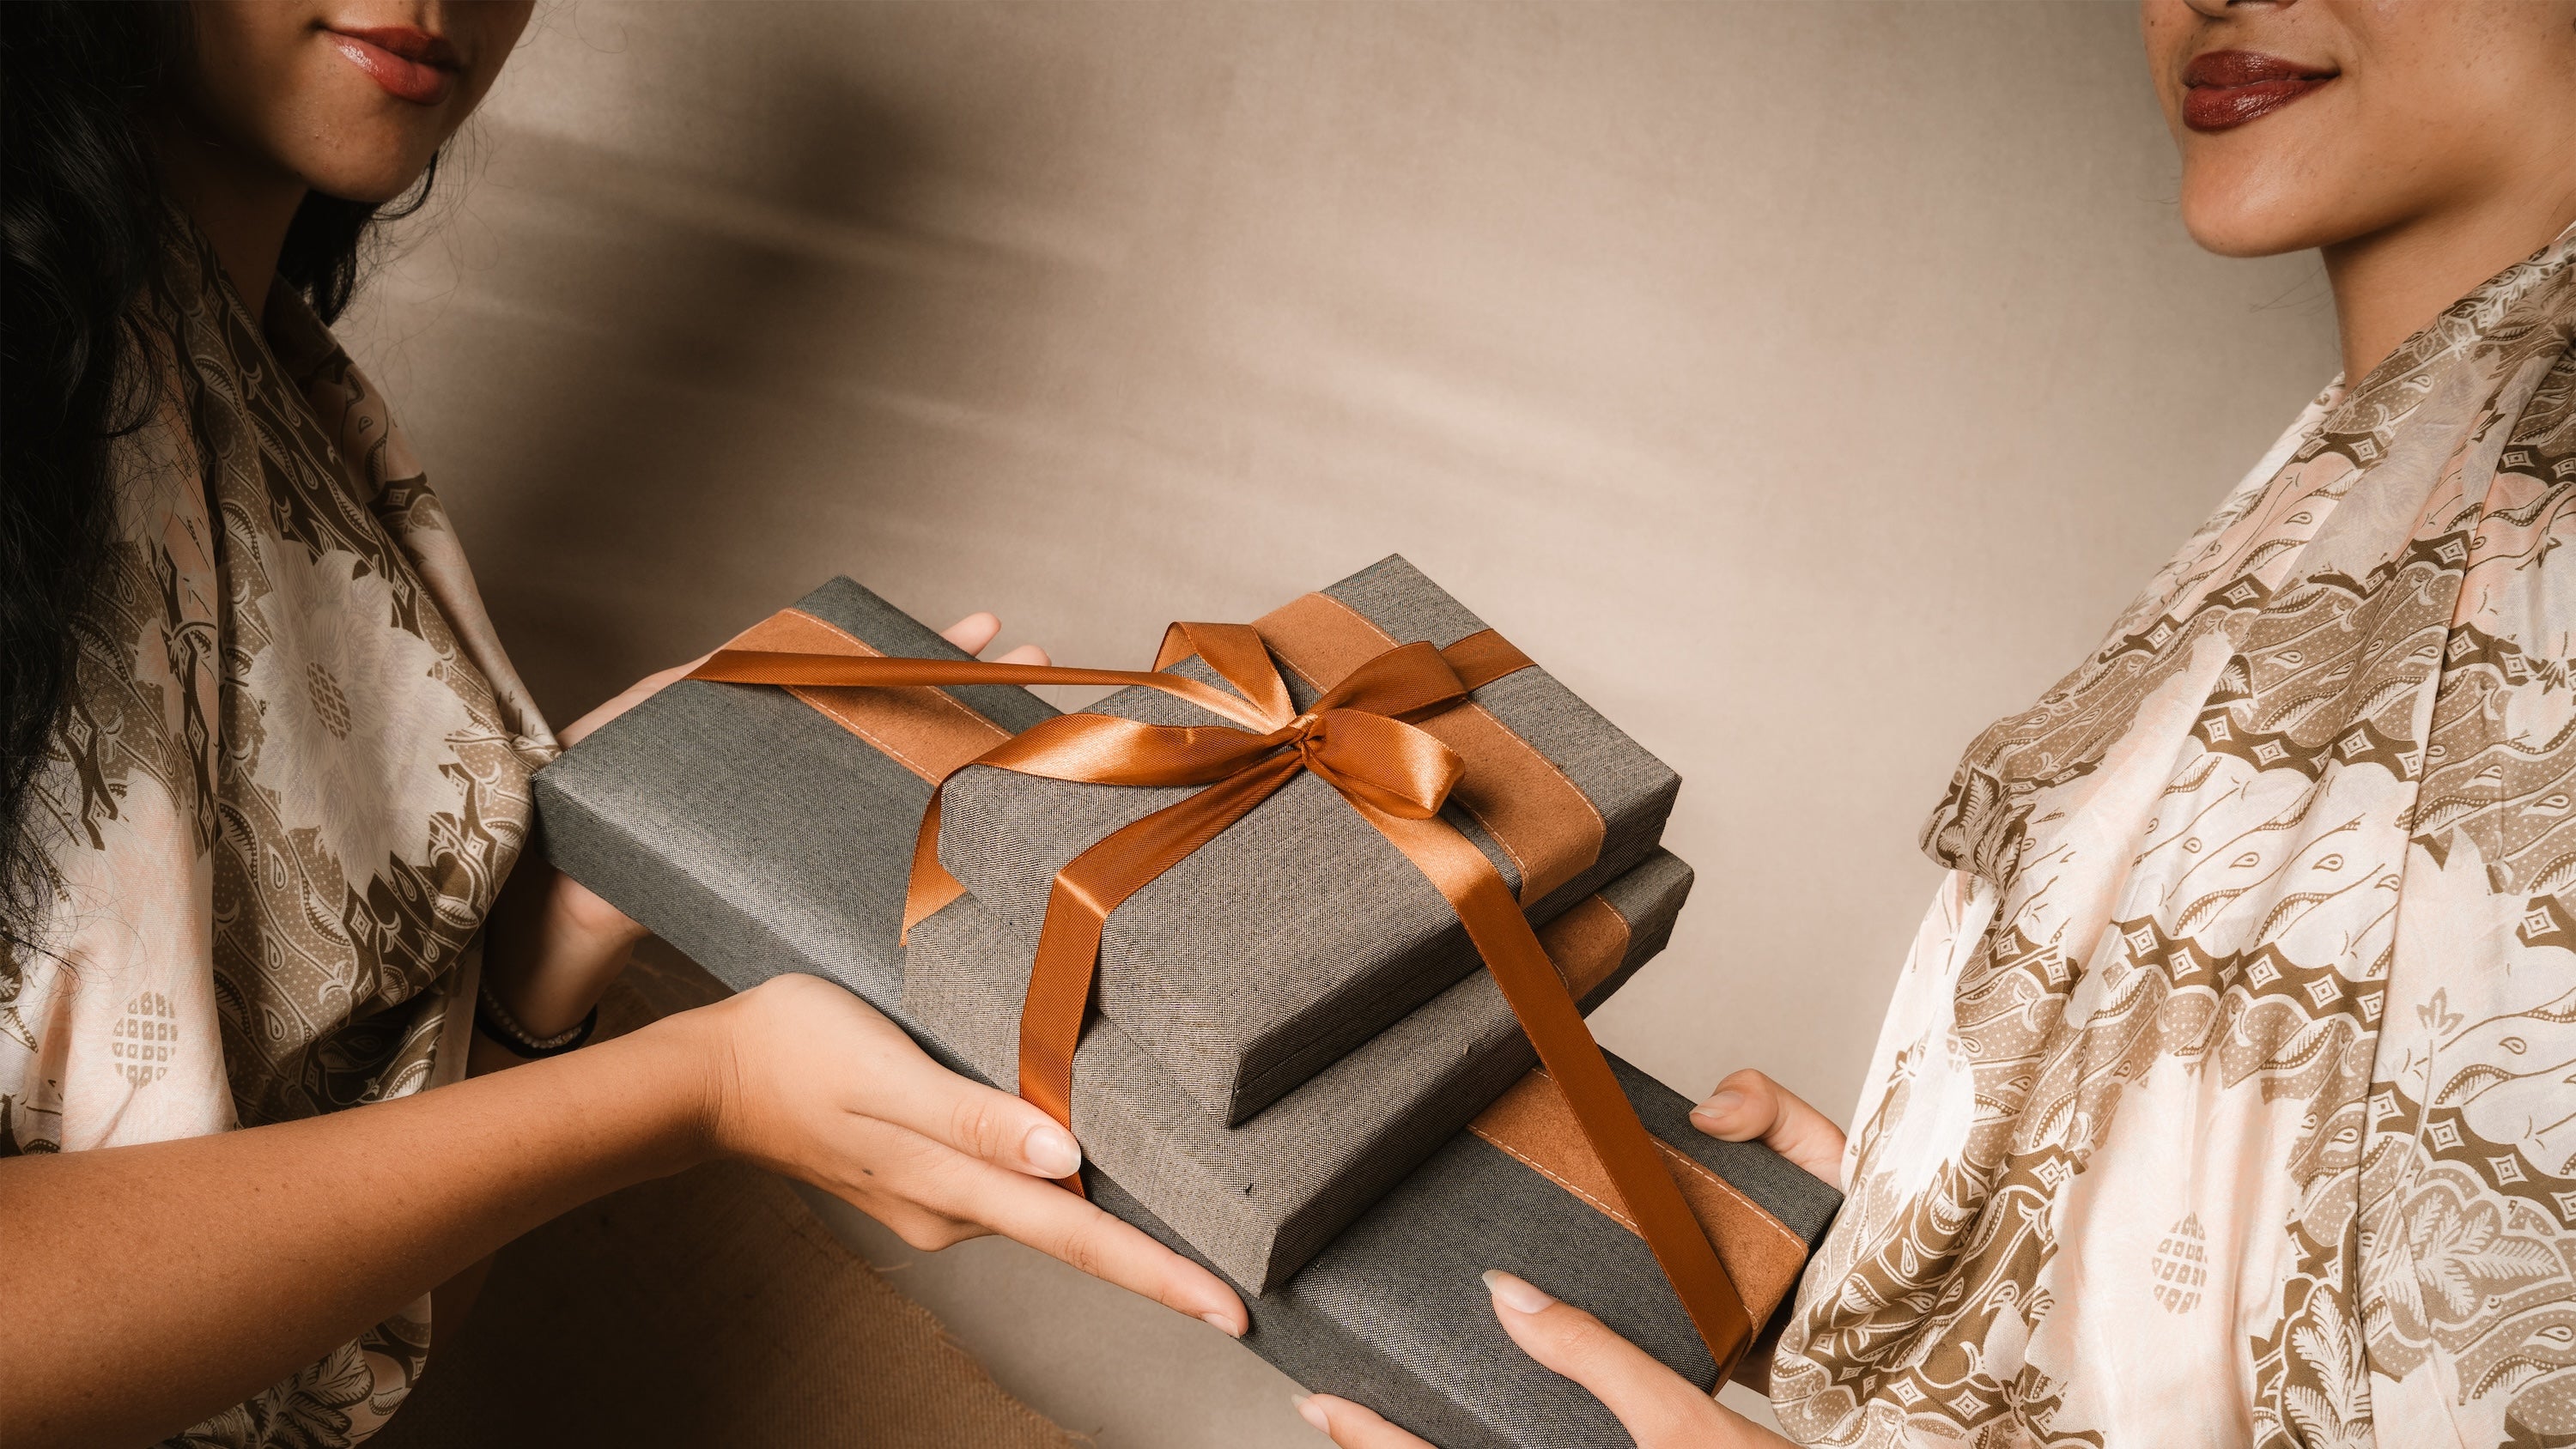 Two women smiling while holding a gift box with a brown ribbon.